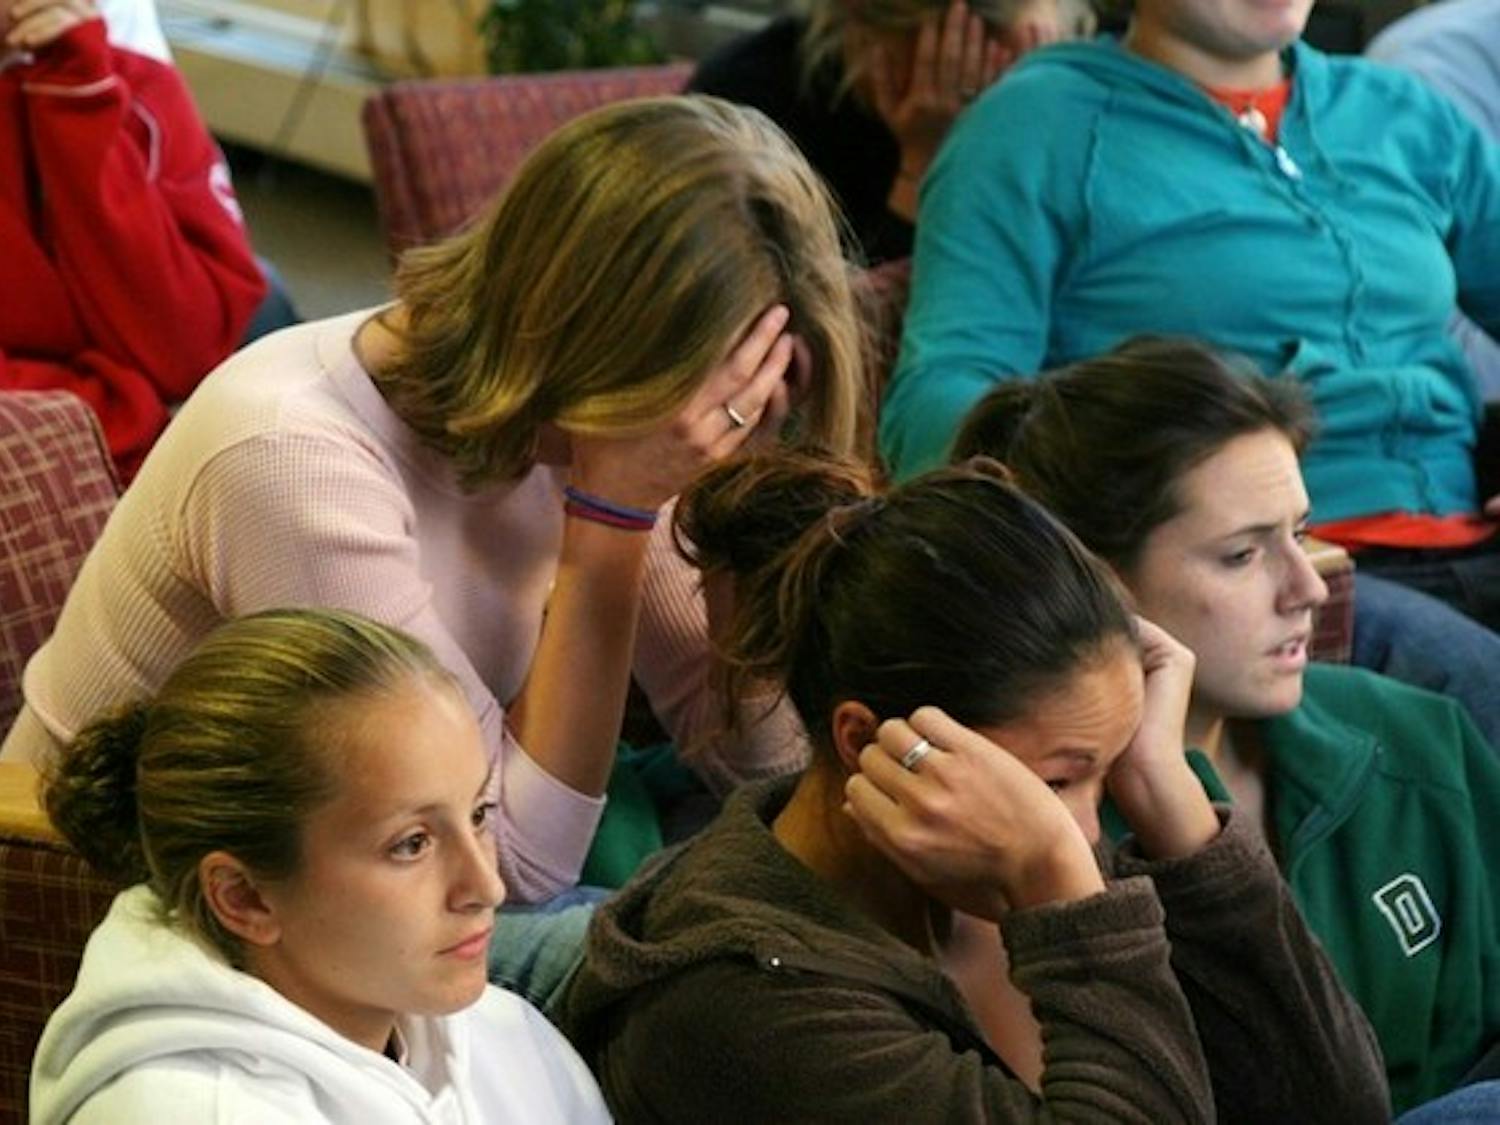 Women's soccer team members, watching the selection results in Collis, react to their NCAA tourney snub.